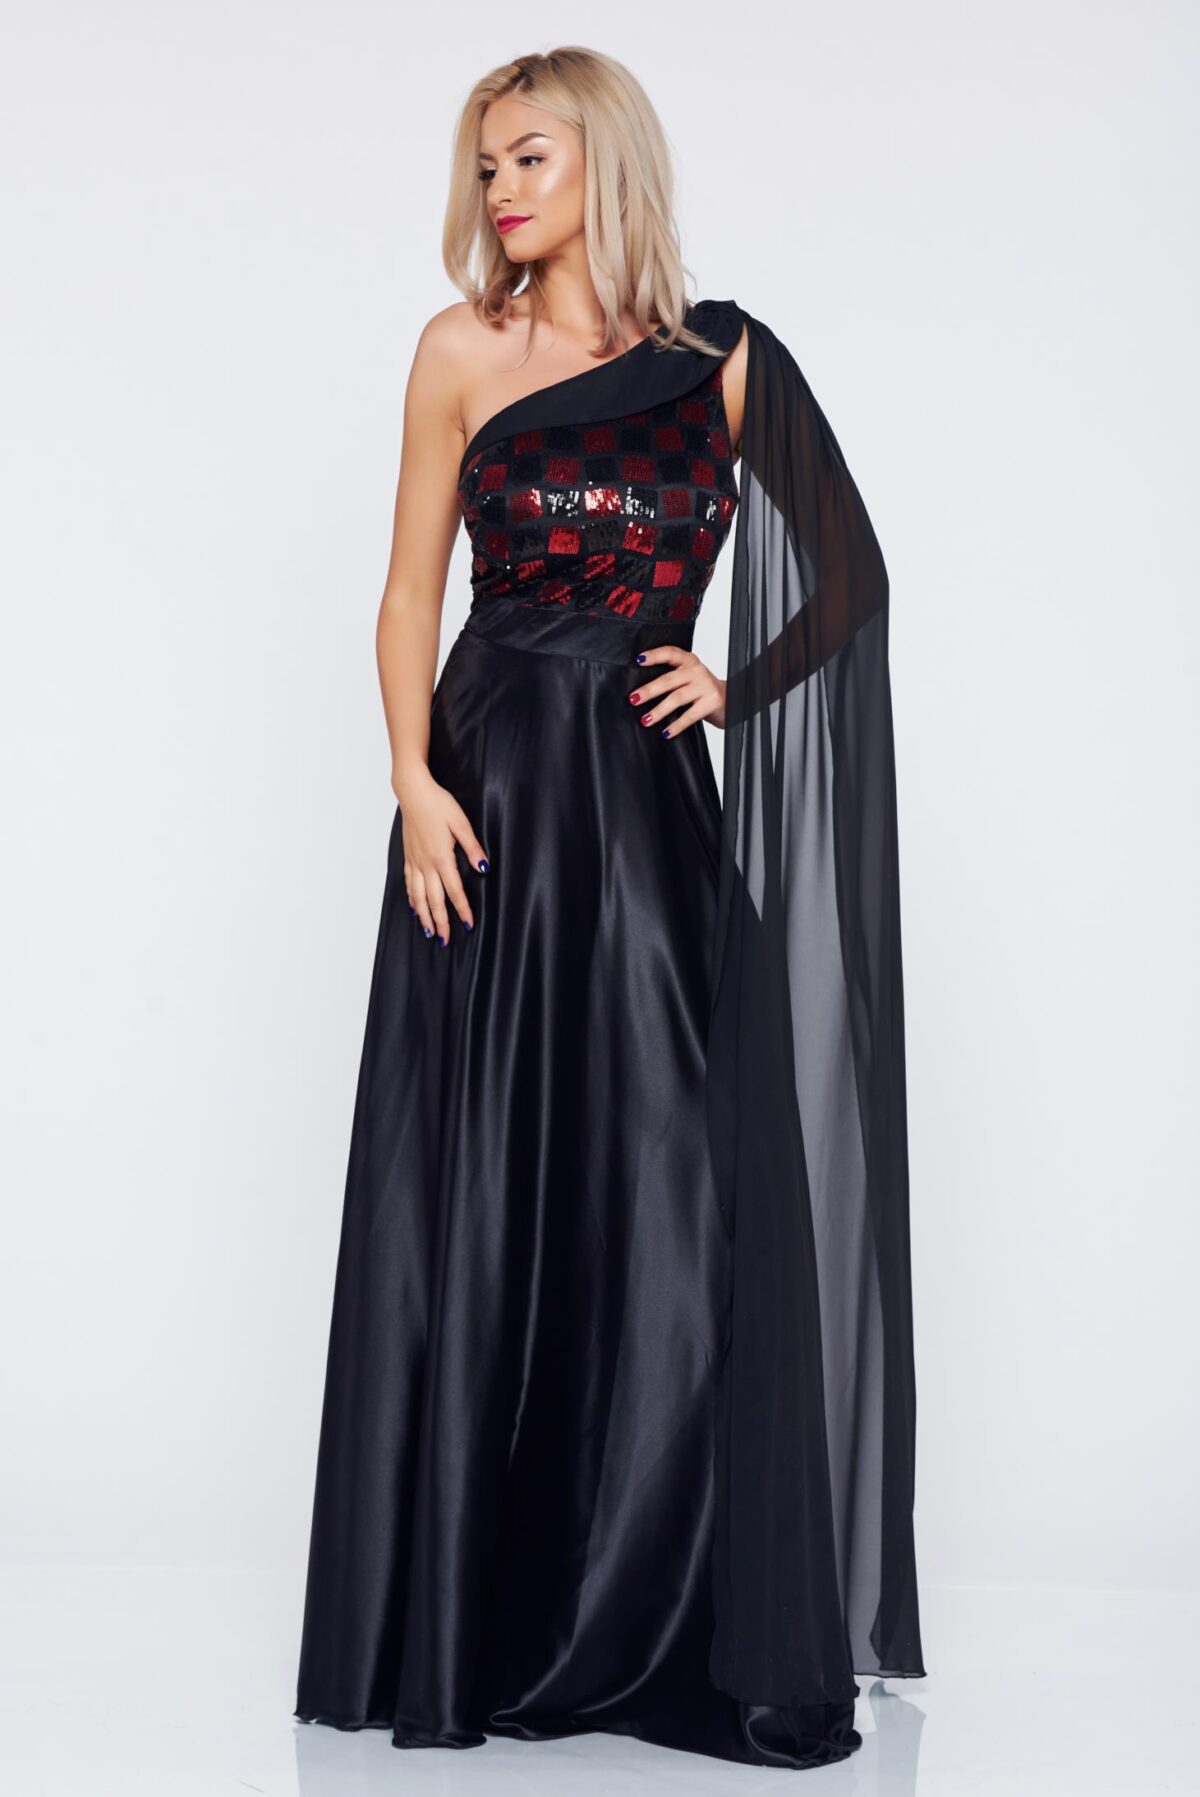 One Shoulder Black Occasional Dress With Satin Fabric Texture